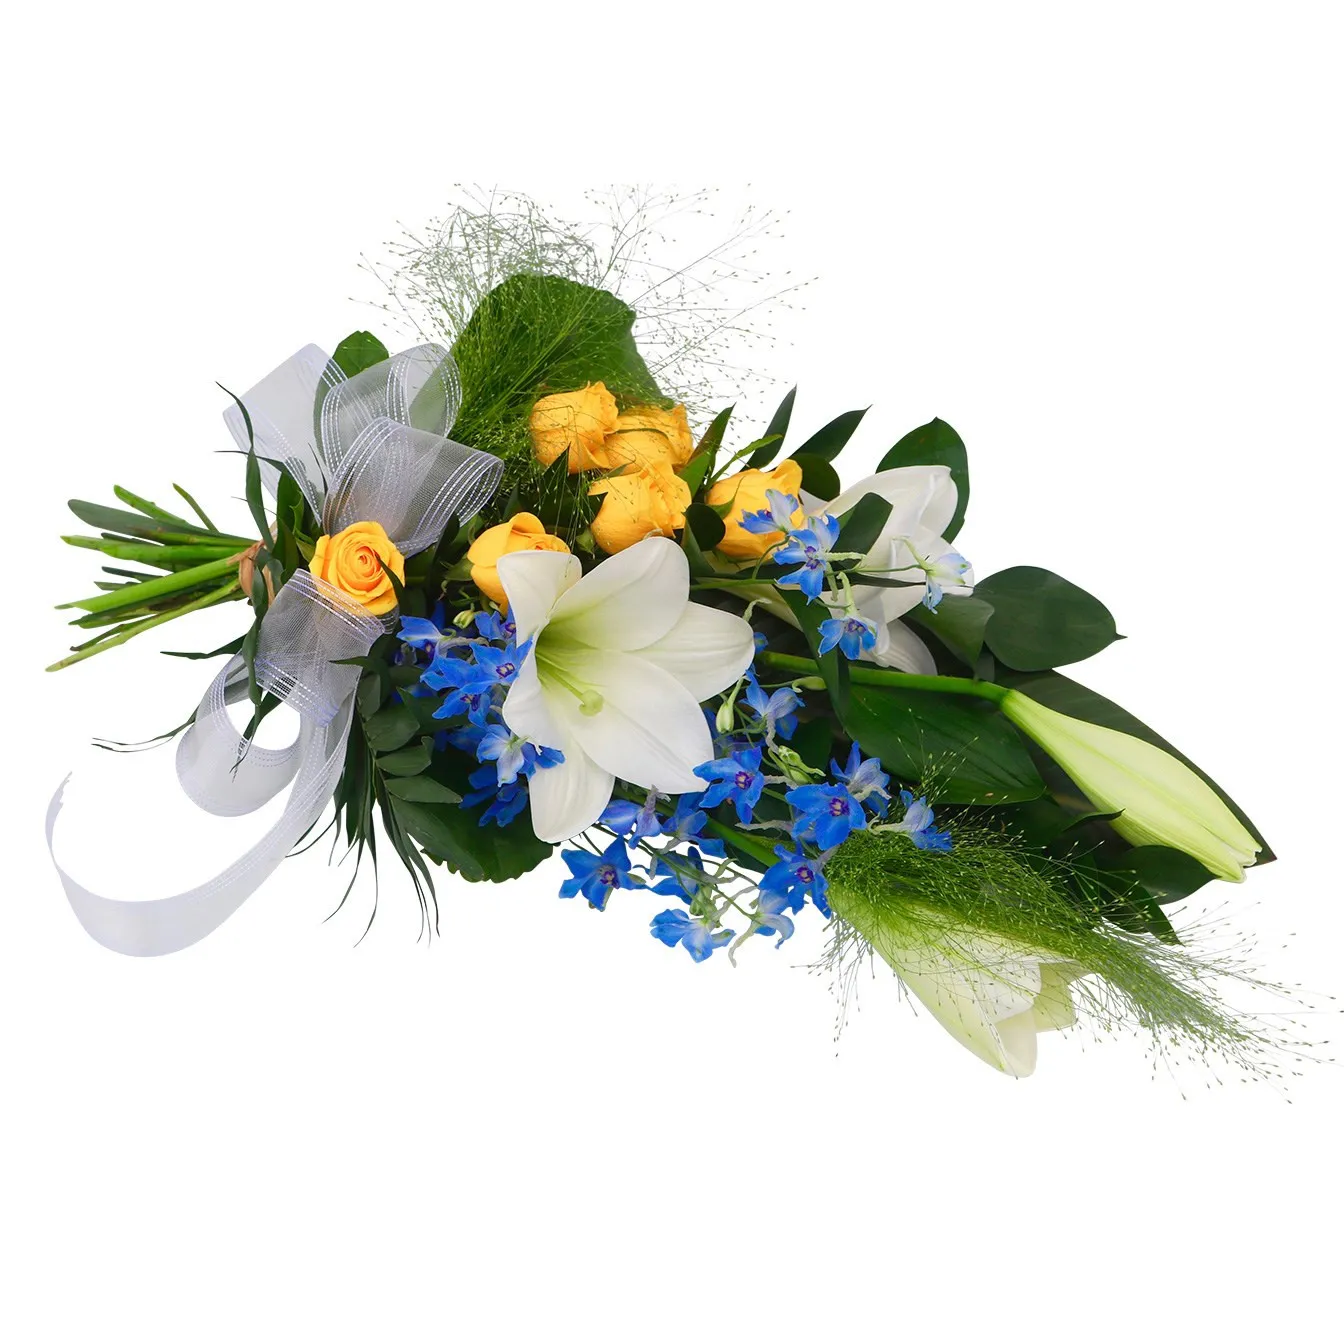 Silence has arrived -funeral bouquet - Finland